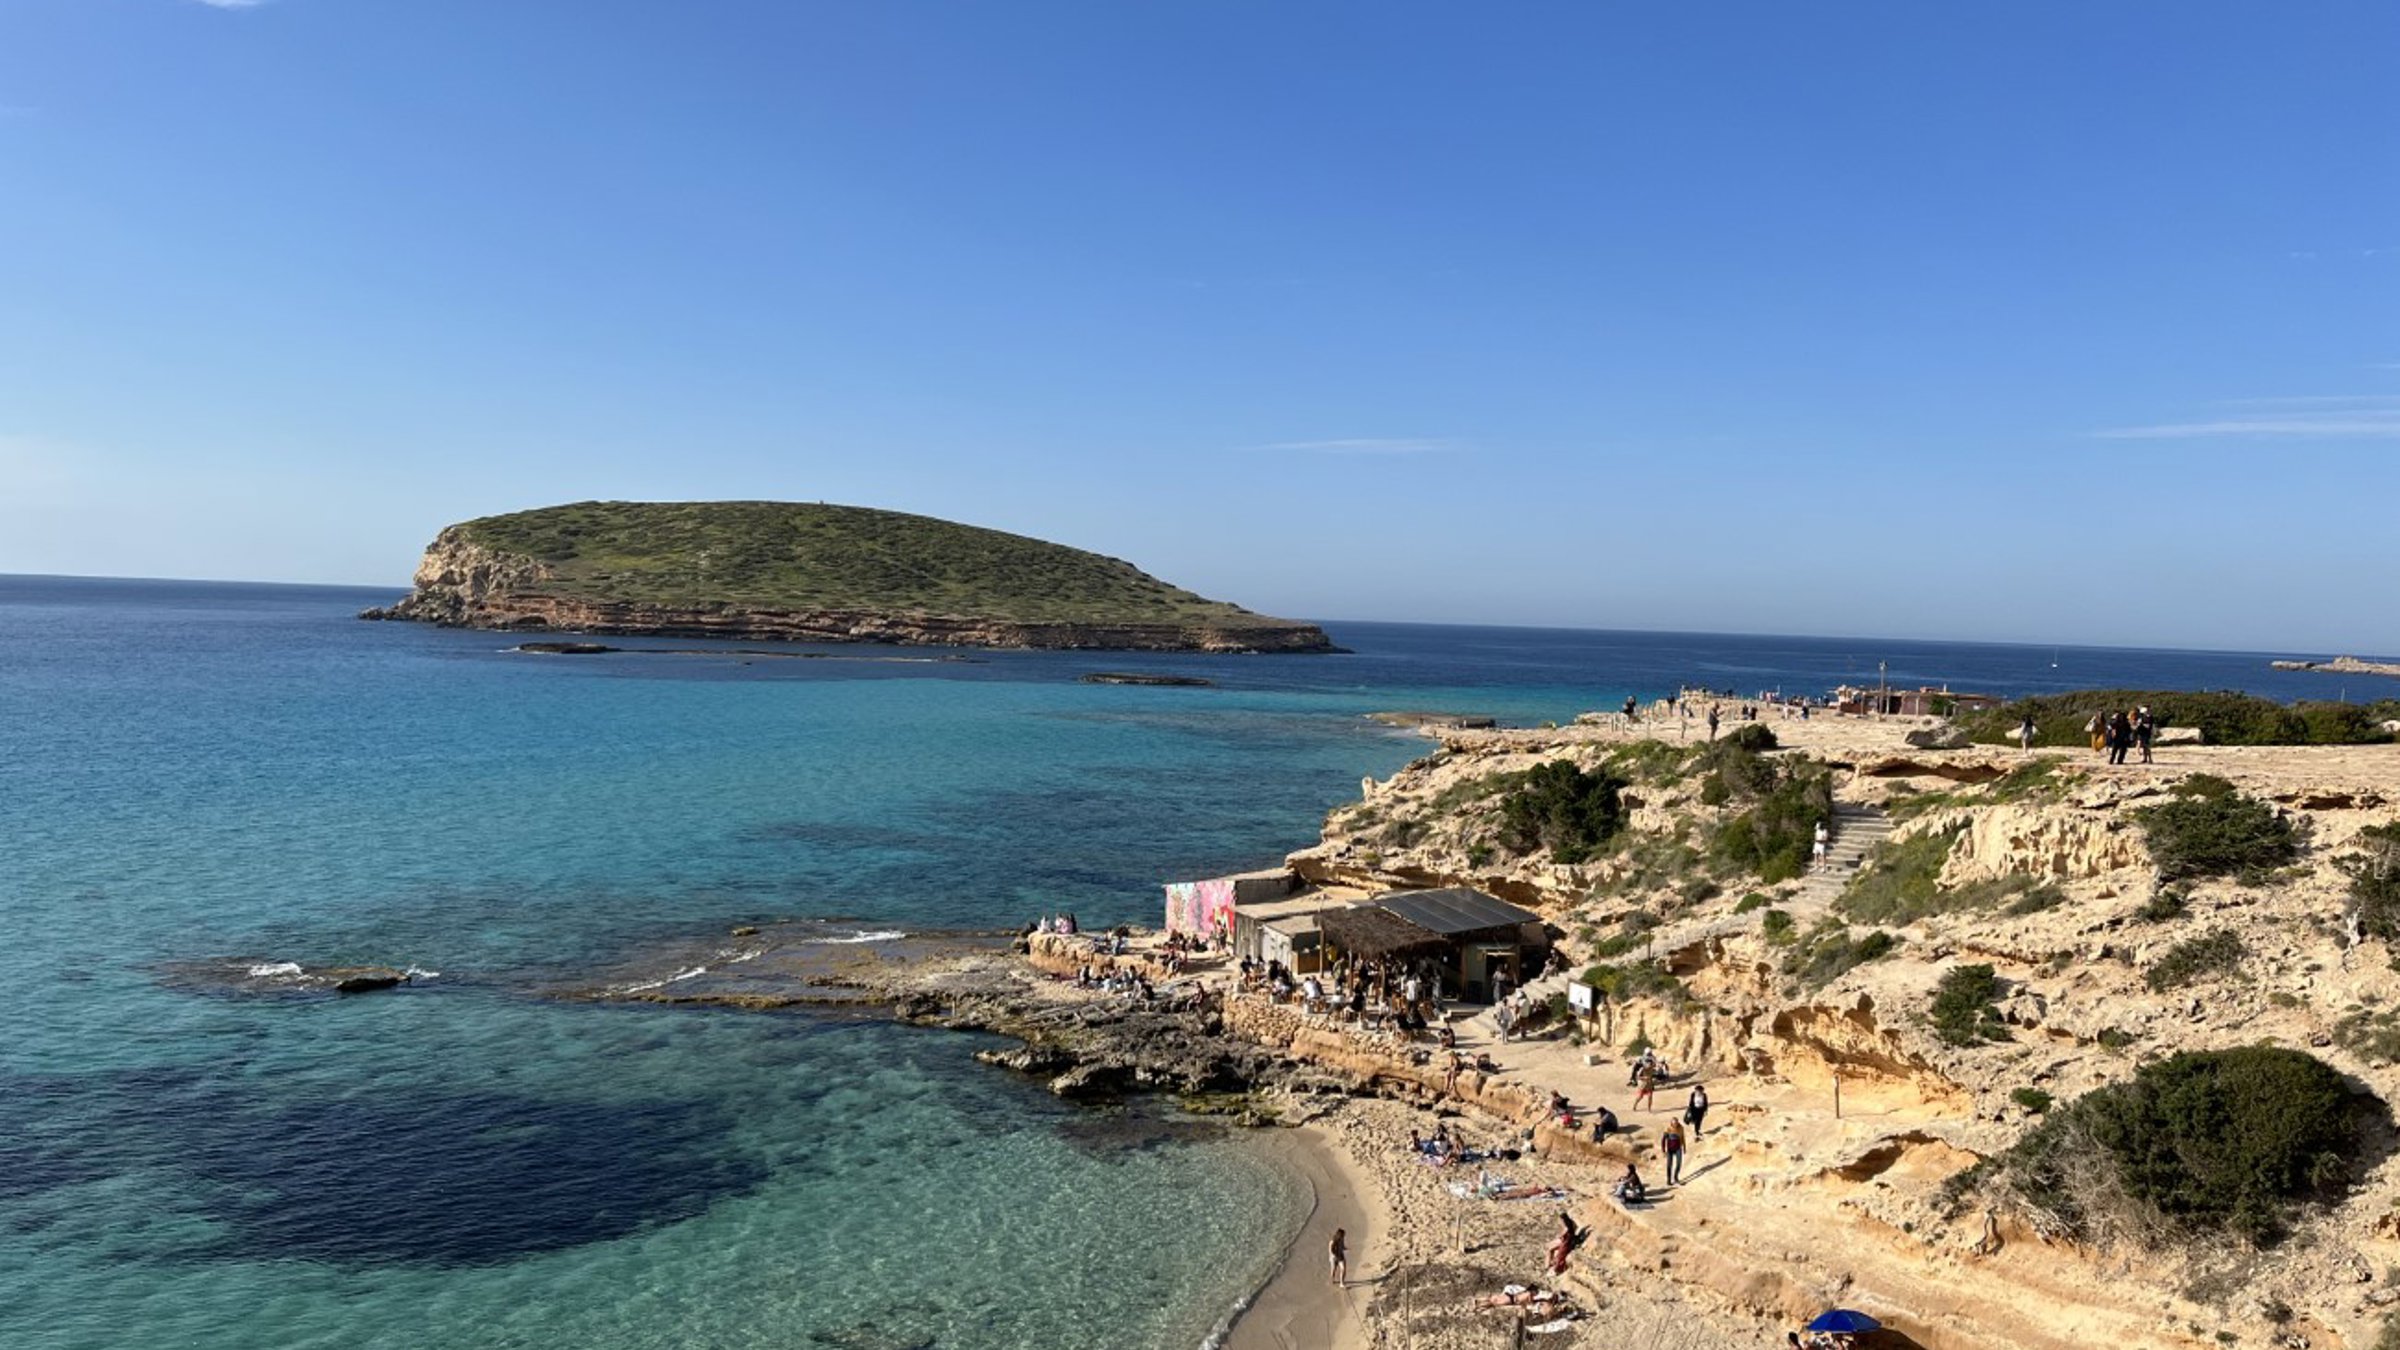 Cala Conta Seeing From Far With People By The Gold Sand